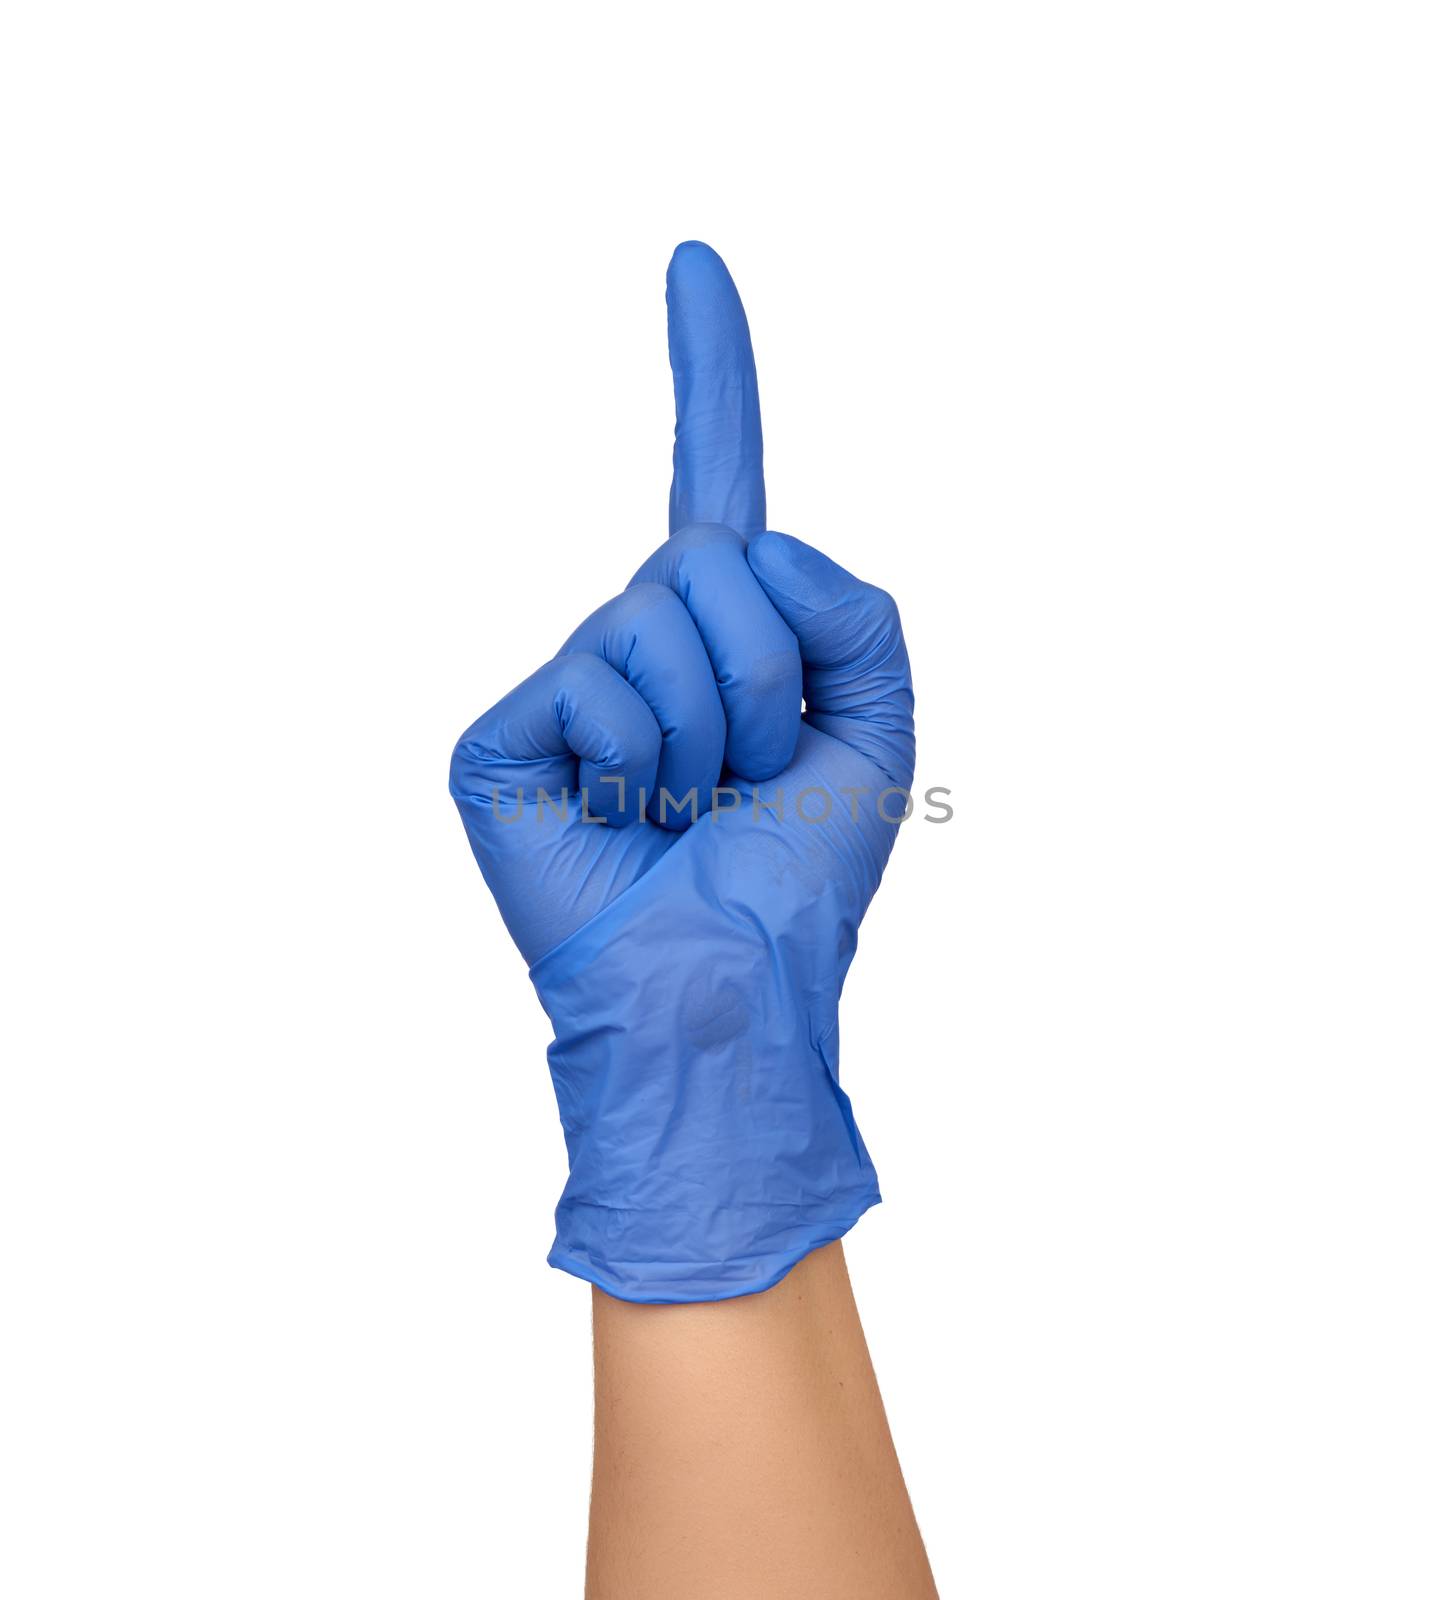 female hand in a blue medical sterile glove shows a gesture, the index finger is raised up, part of the body is isolated on a white background, attention concept